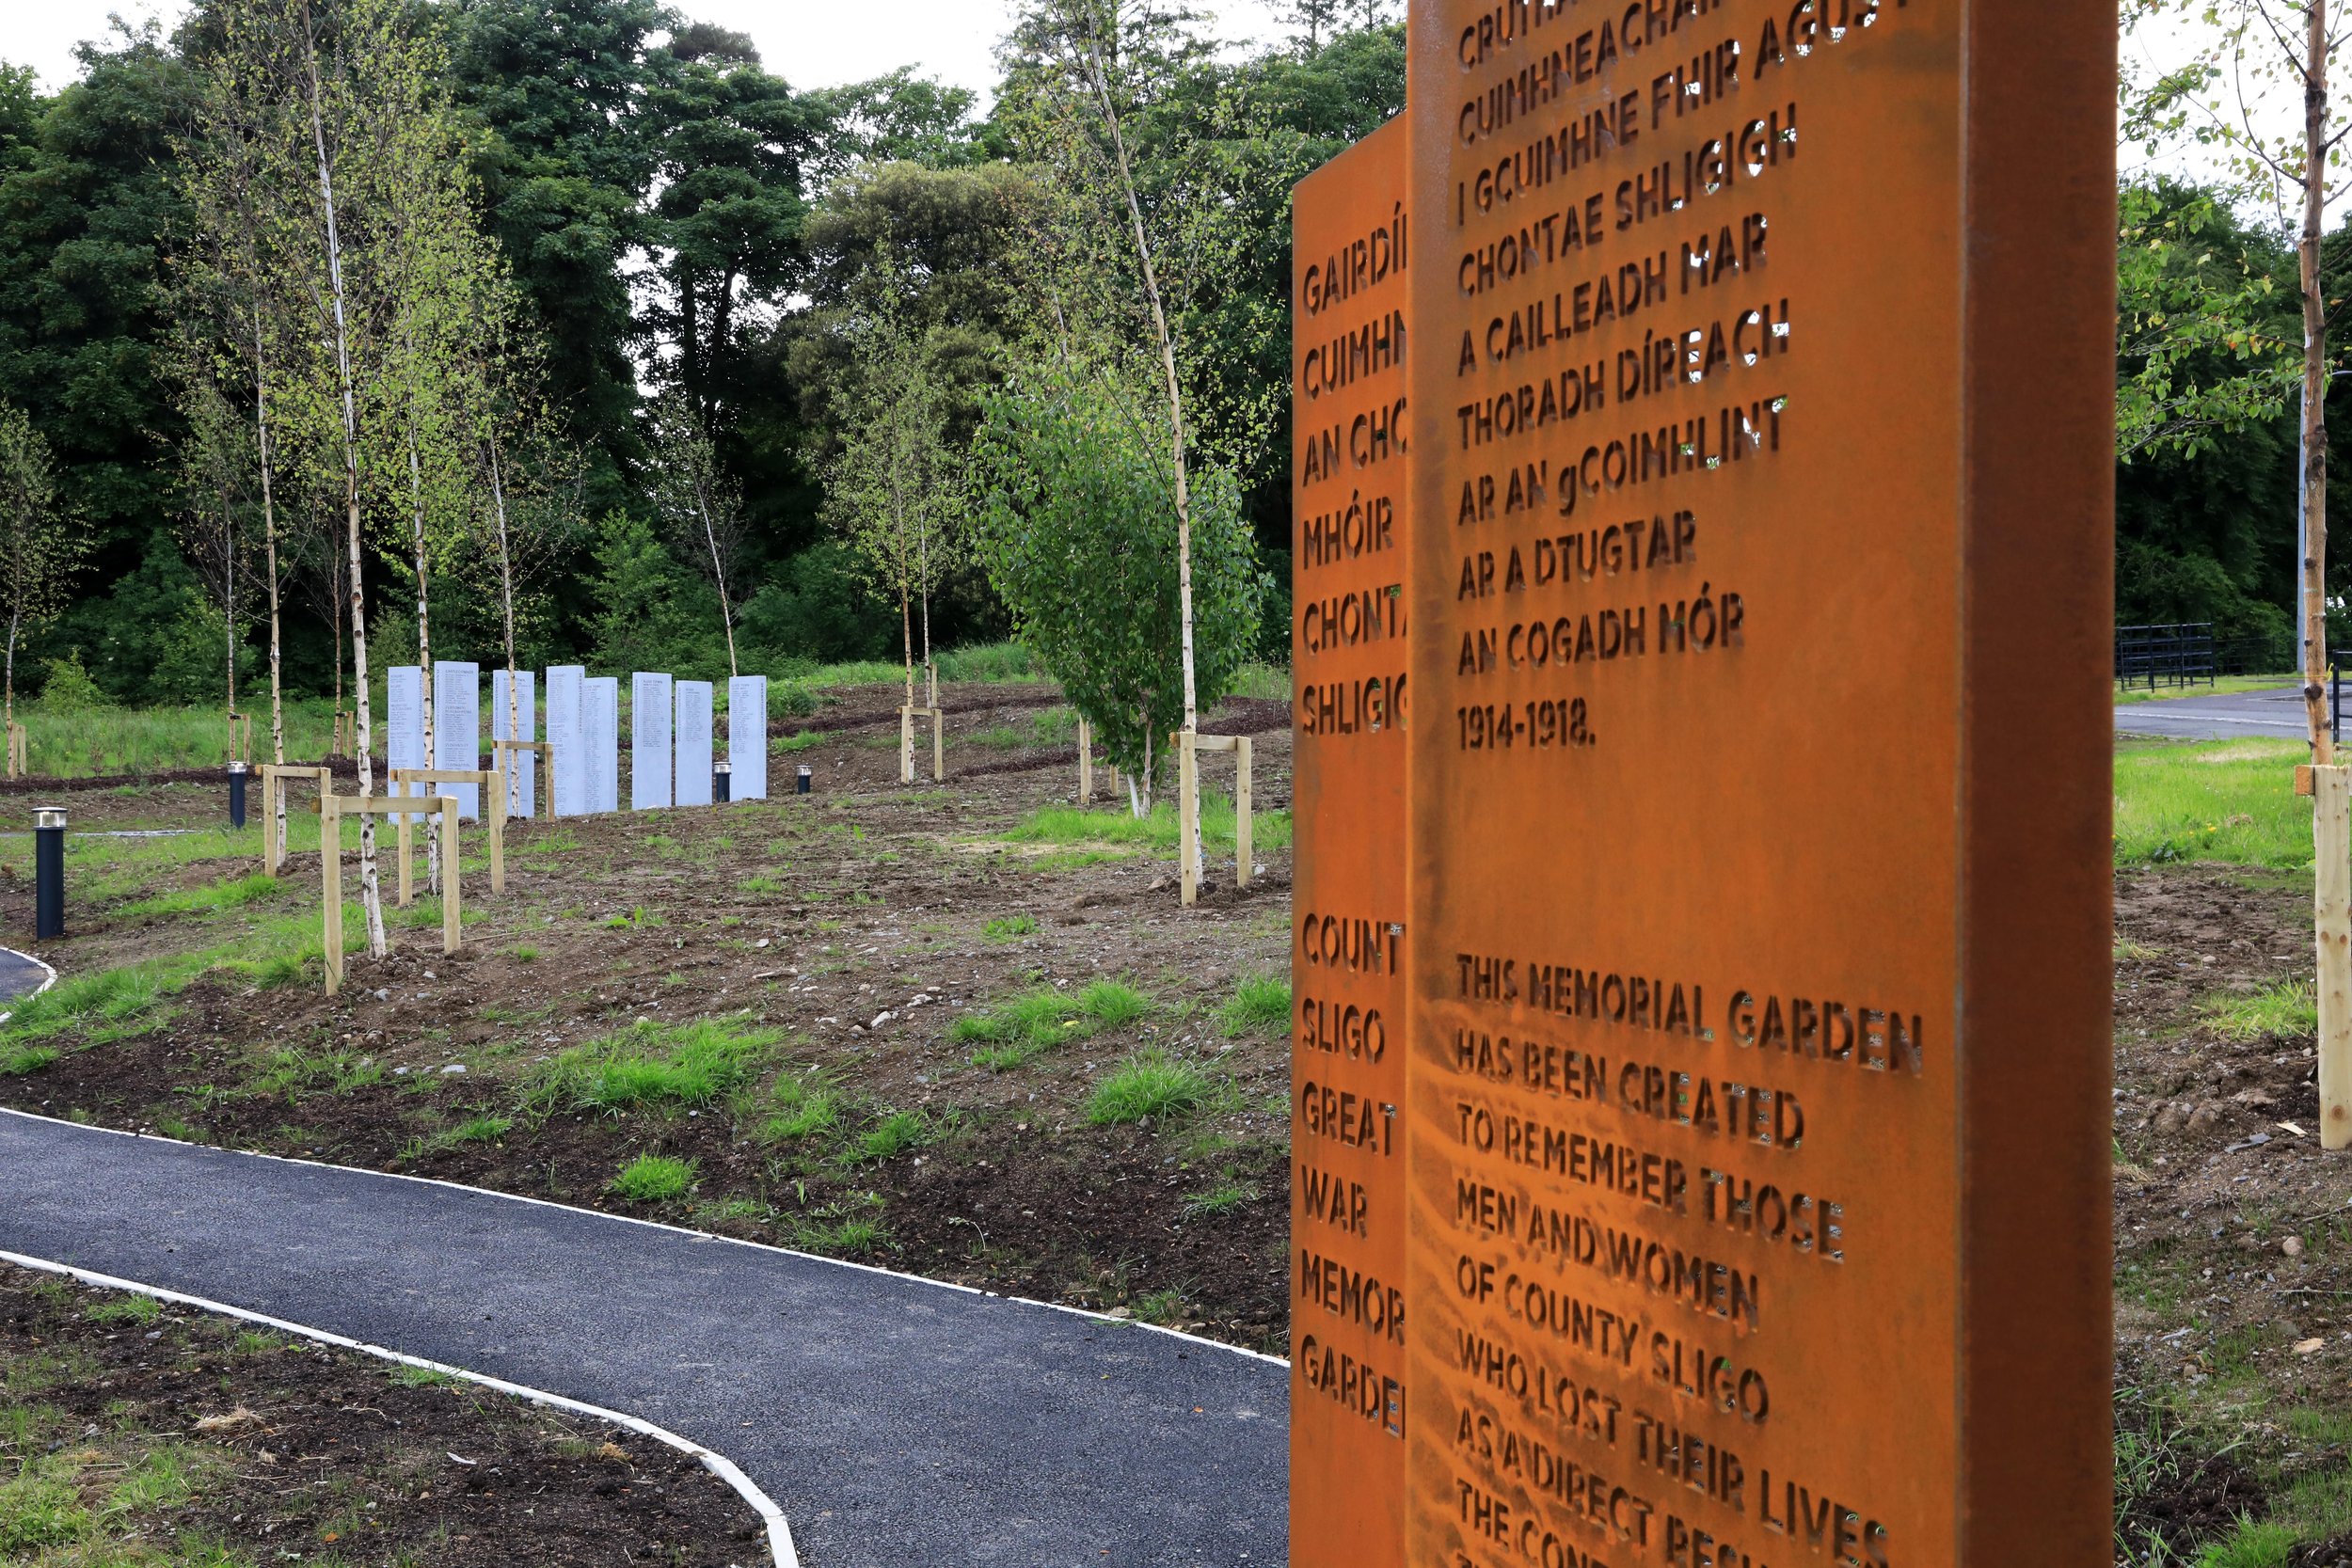  Corten Steel signage at the entrance to the memorial garden 